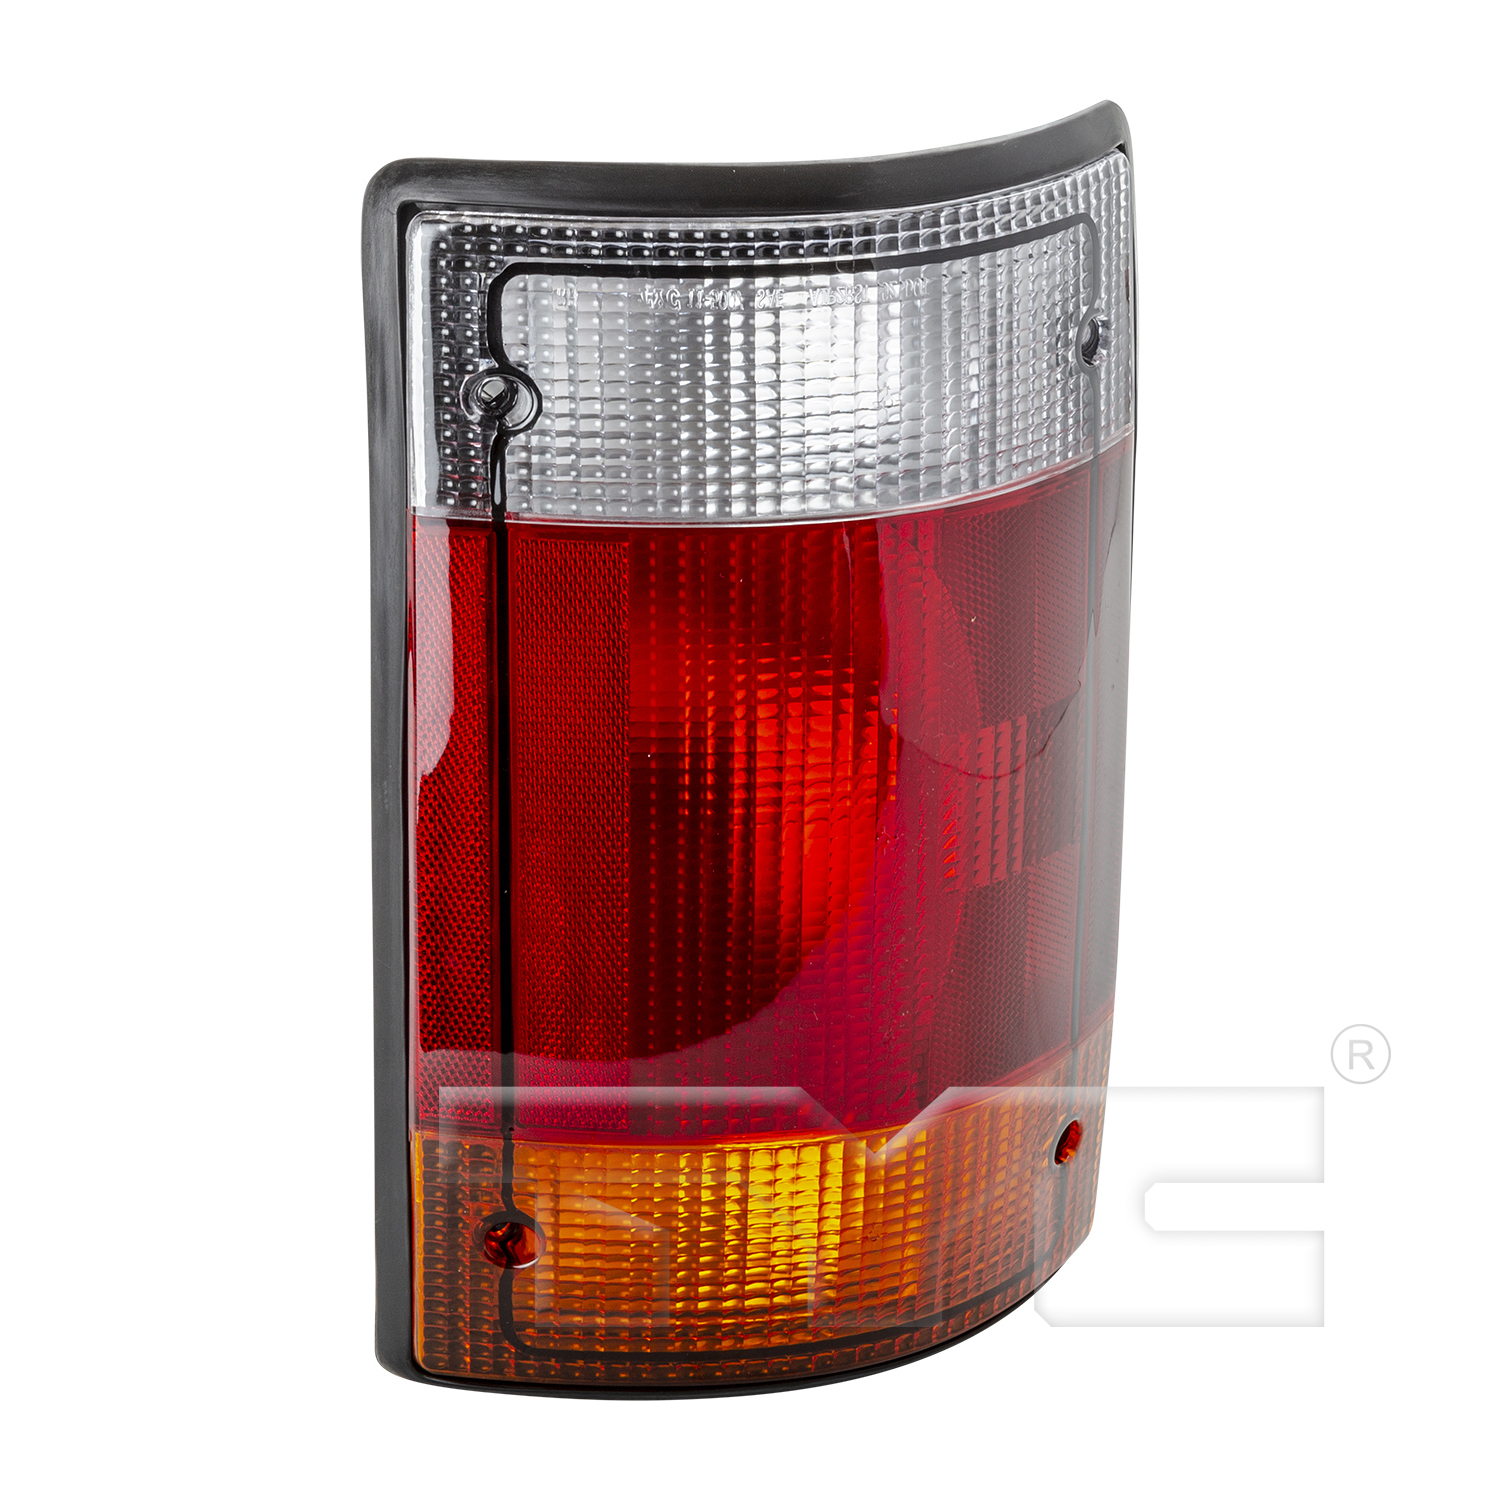 Aftermarket TAILLIGHTS for FORD - E-150 ECONOLINE CLUB WAGON, E-150 ECONOLINE CLUB WAGON,92-94,LT Taillamp assy